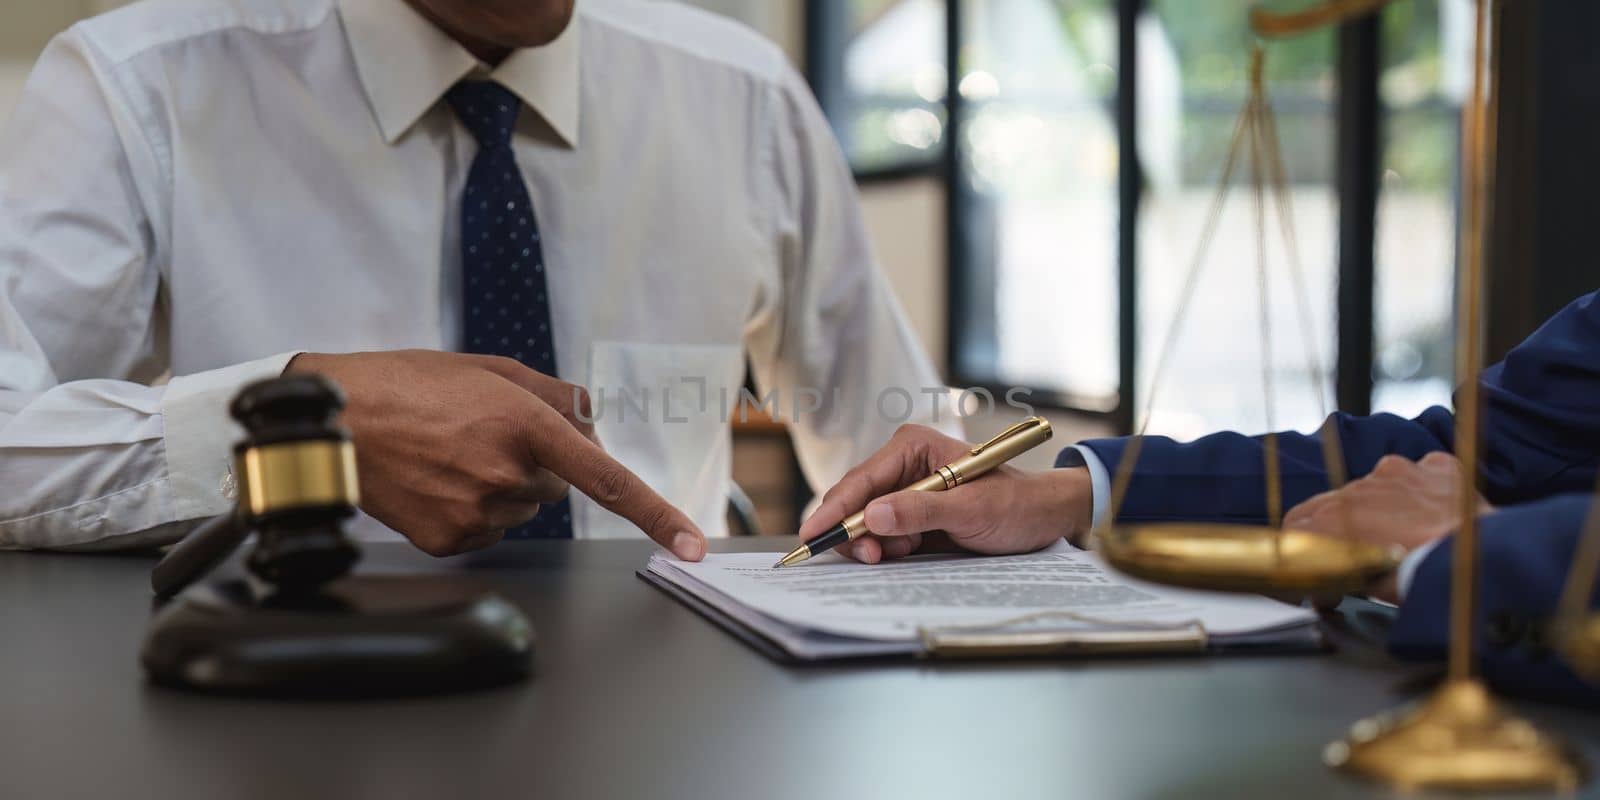 Business people and lawyers discussing contract papers with brass scale on wooden desk in office. Law, legal services, advice, Justice concept by itchaznong